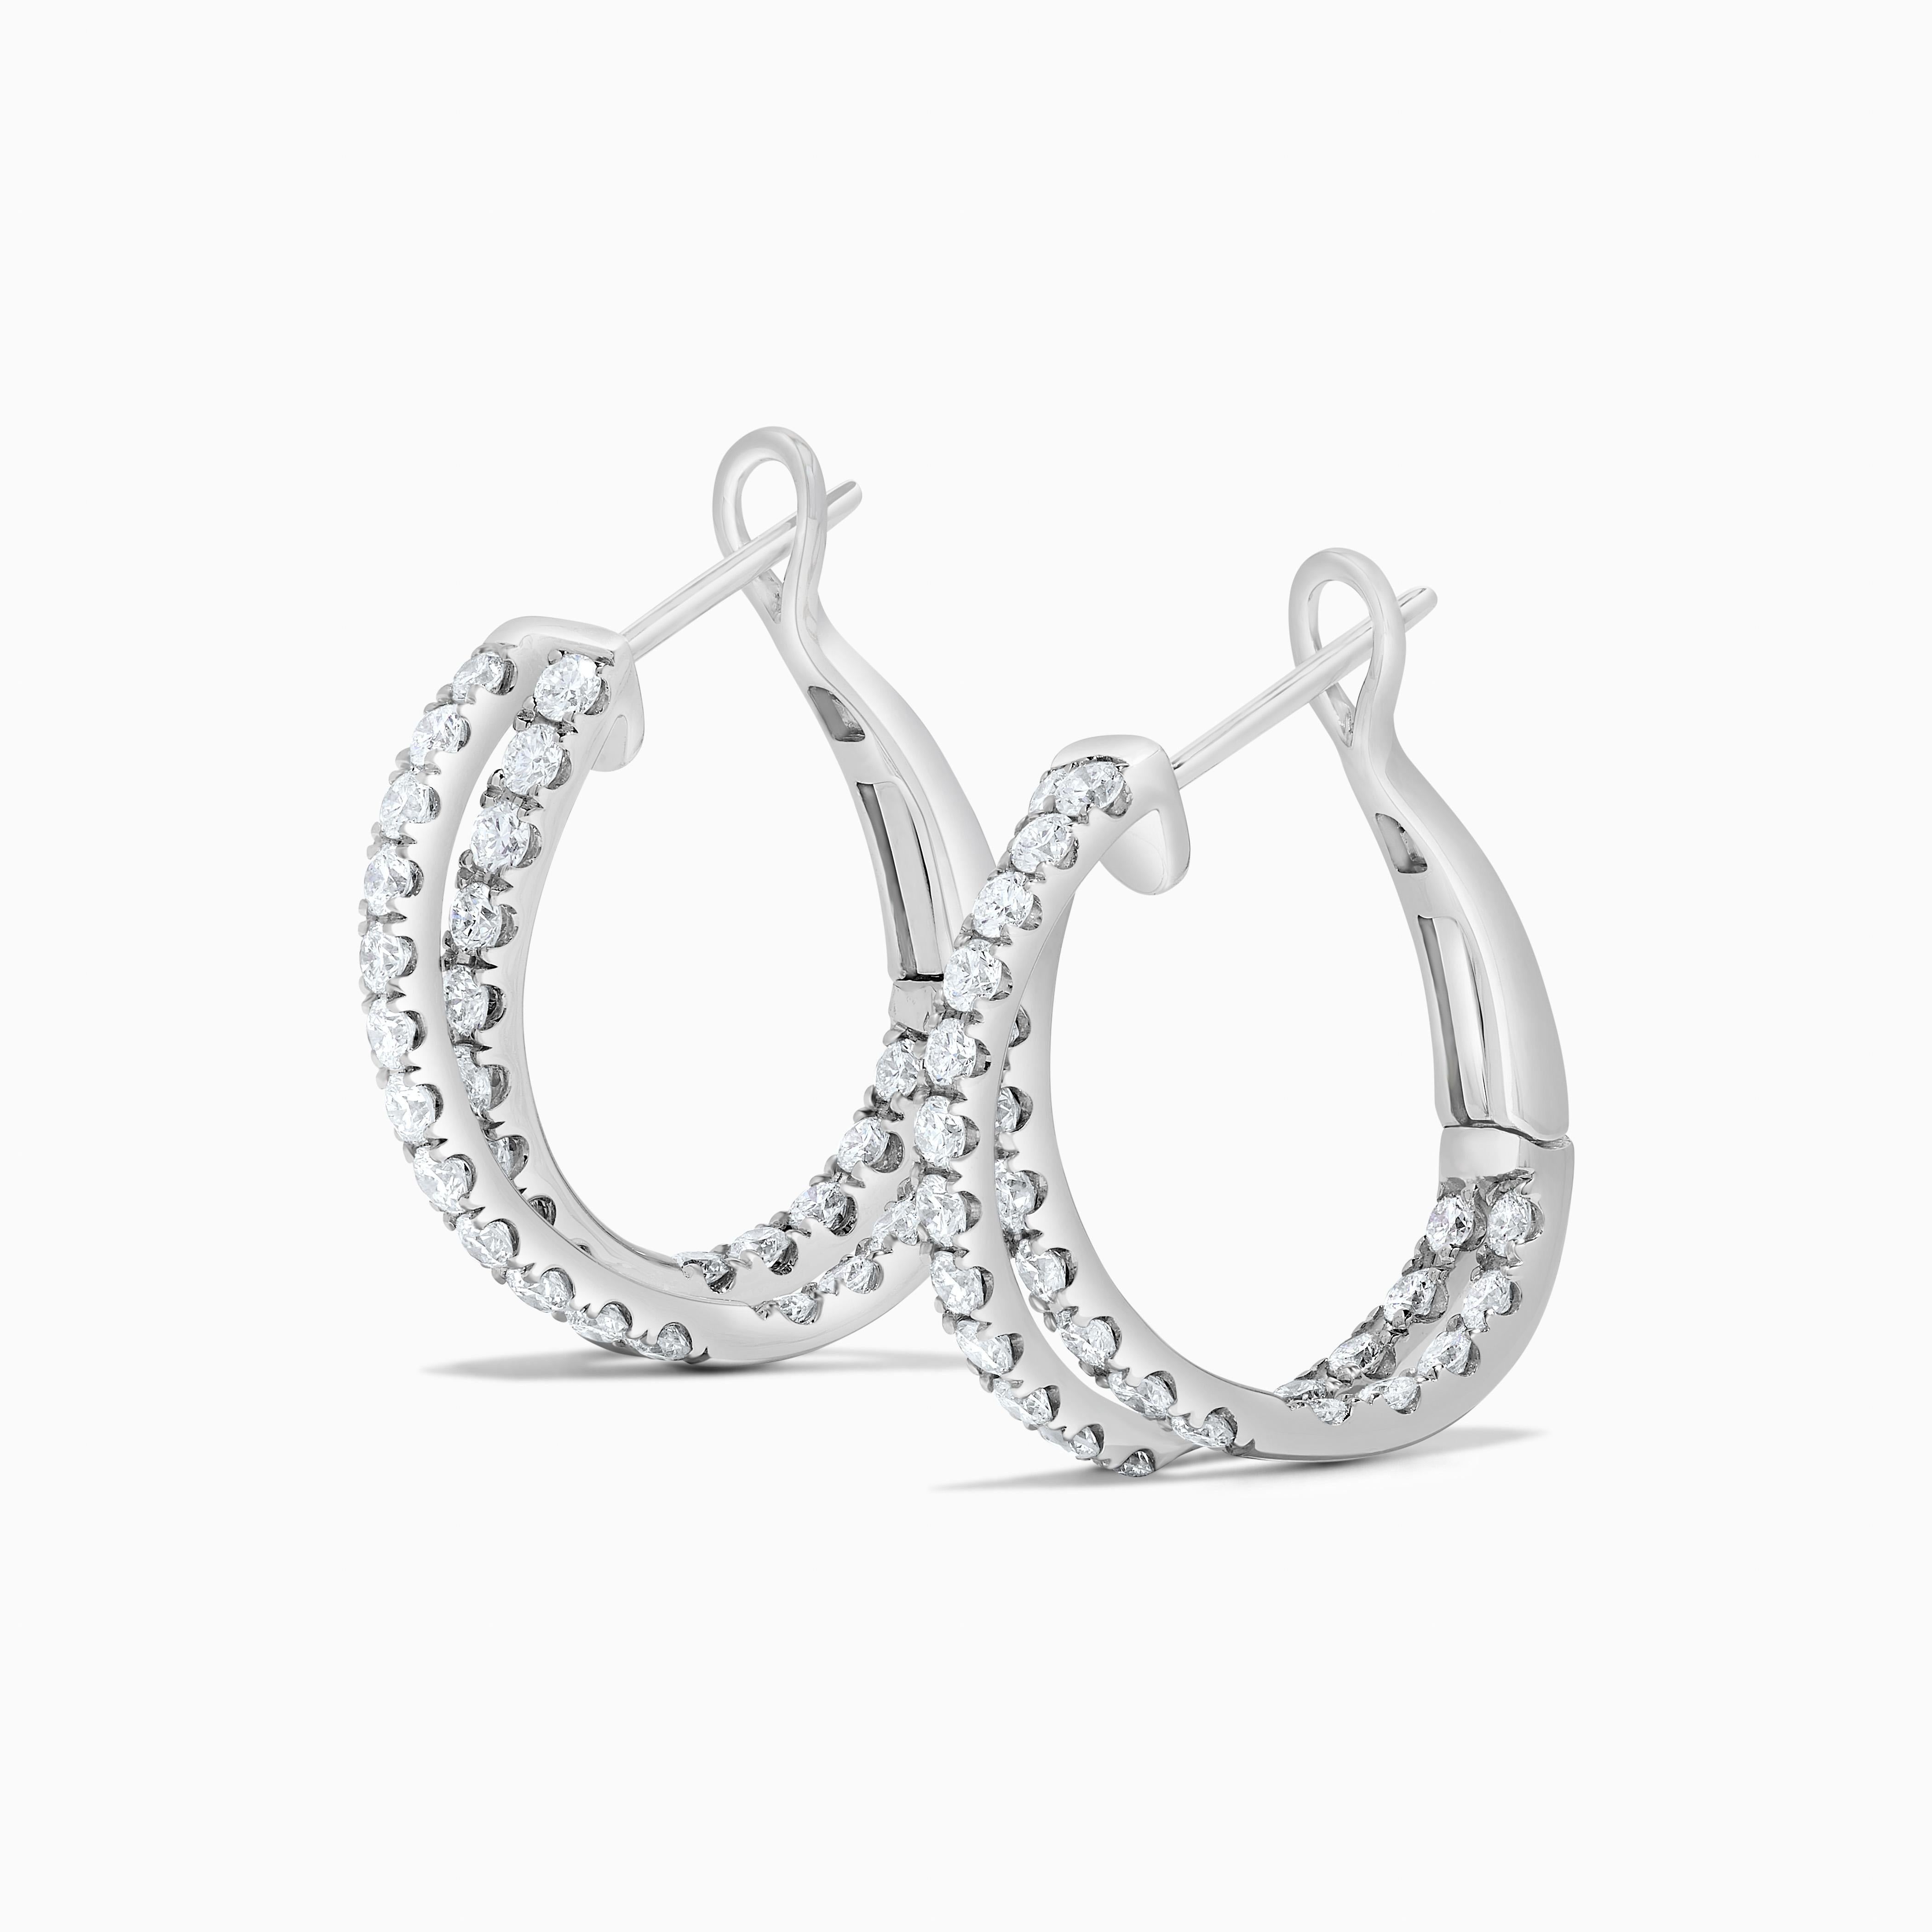 RareGemWorld's classic diamond earrings. Mounted in a beautiful 18K White Gold setting with natural round cut white diamonds in a beautiful interlocking circle form. These earrings are guaranteed to impress and enhance your personal